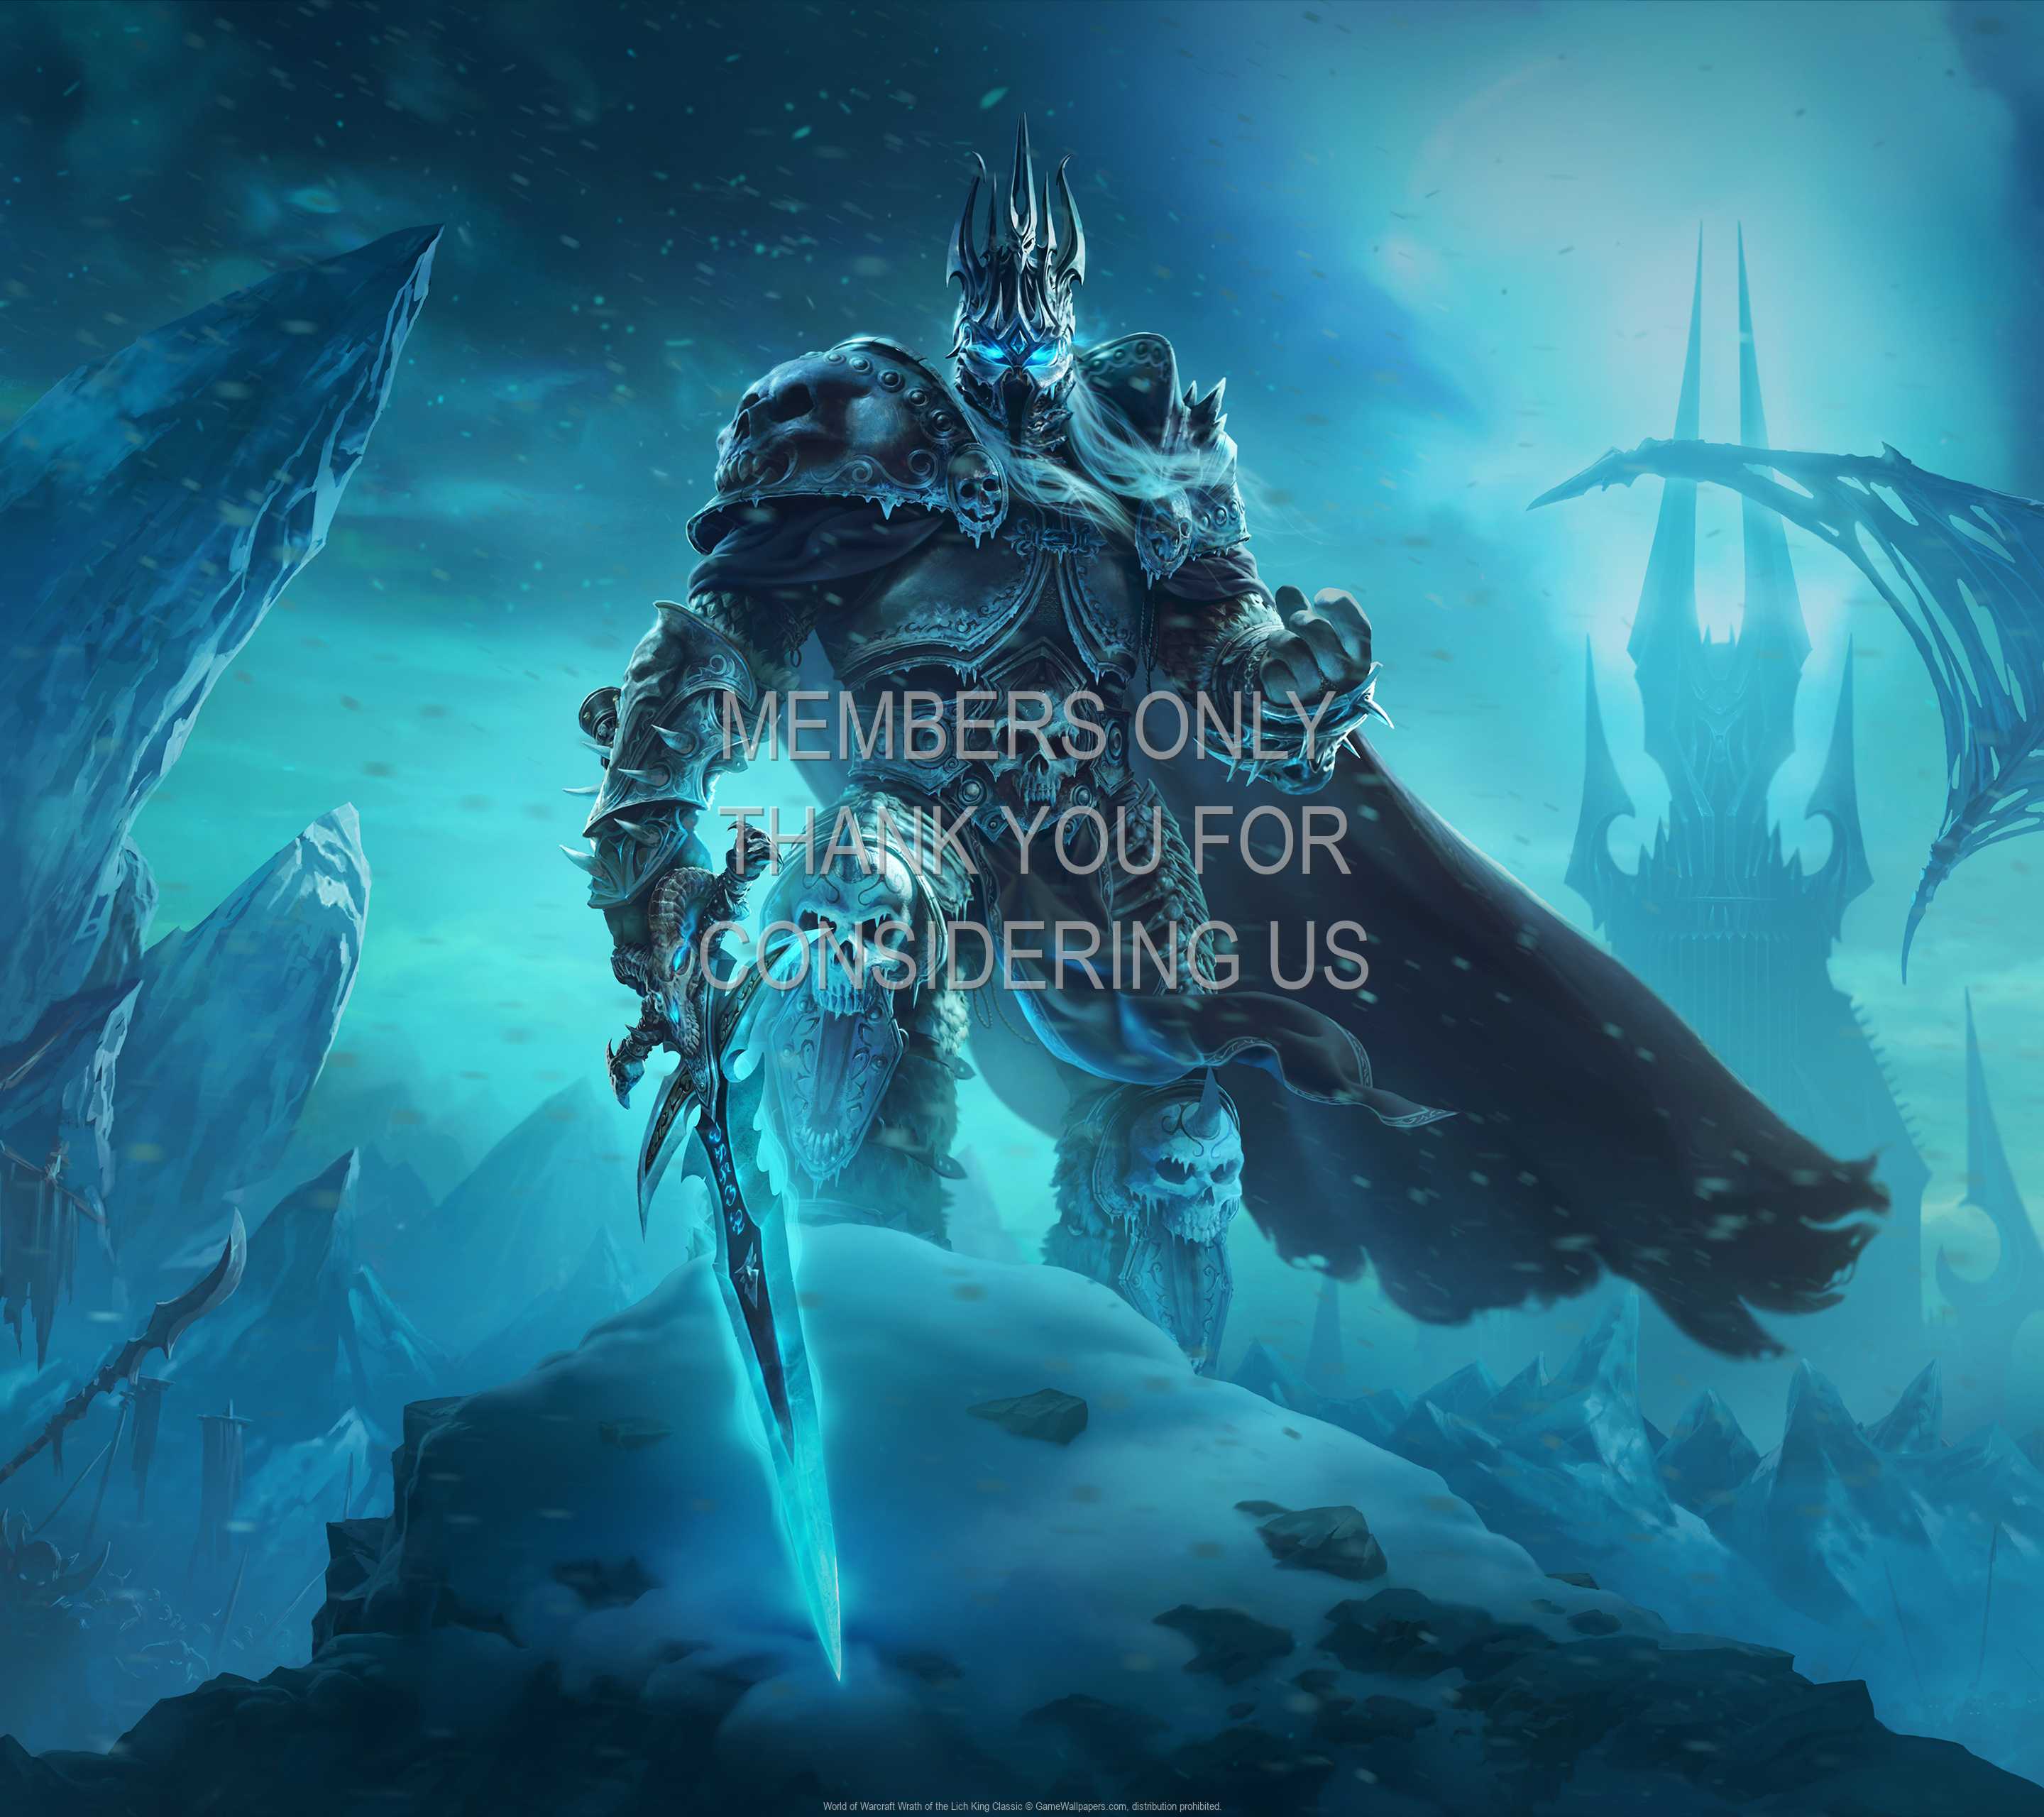 World of Warcraft: Wrath of the Lich King Classic 1440p Horizontal Mobiele achtergrond 01